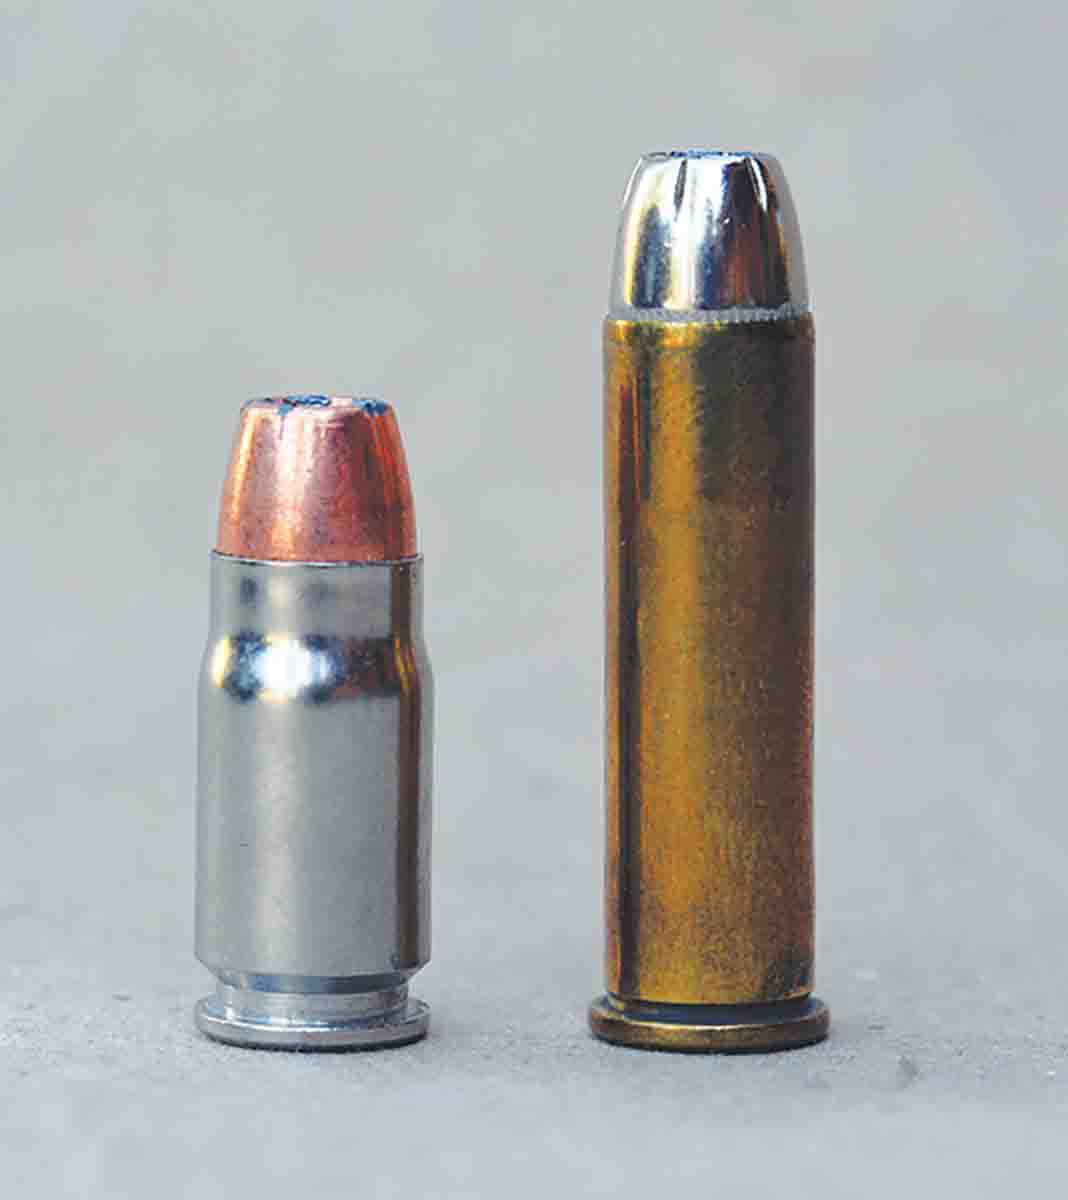 The .357 Sig (left) was designed to duplicate the performance of .357 Magnum (right) loads containing 125-grain bullets.